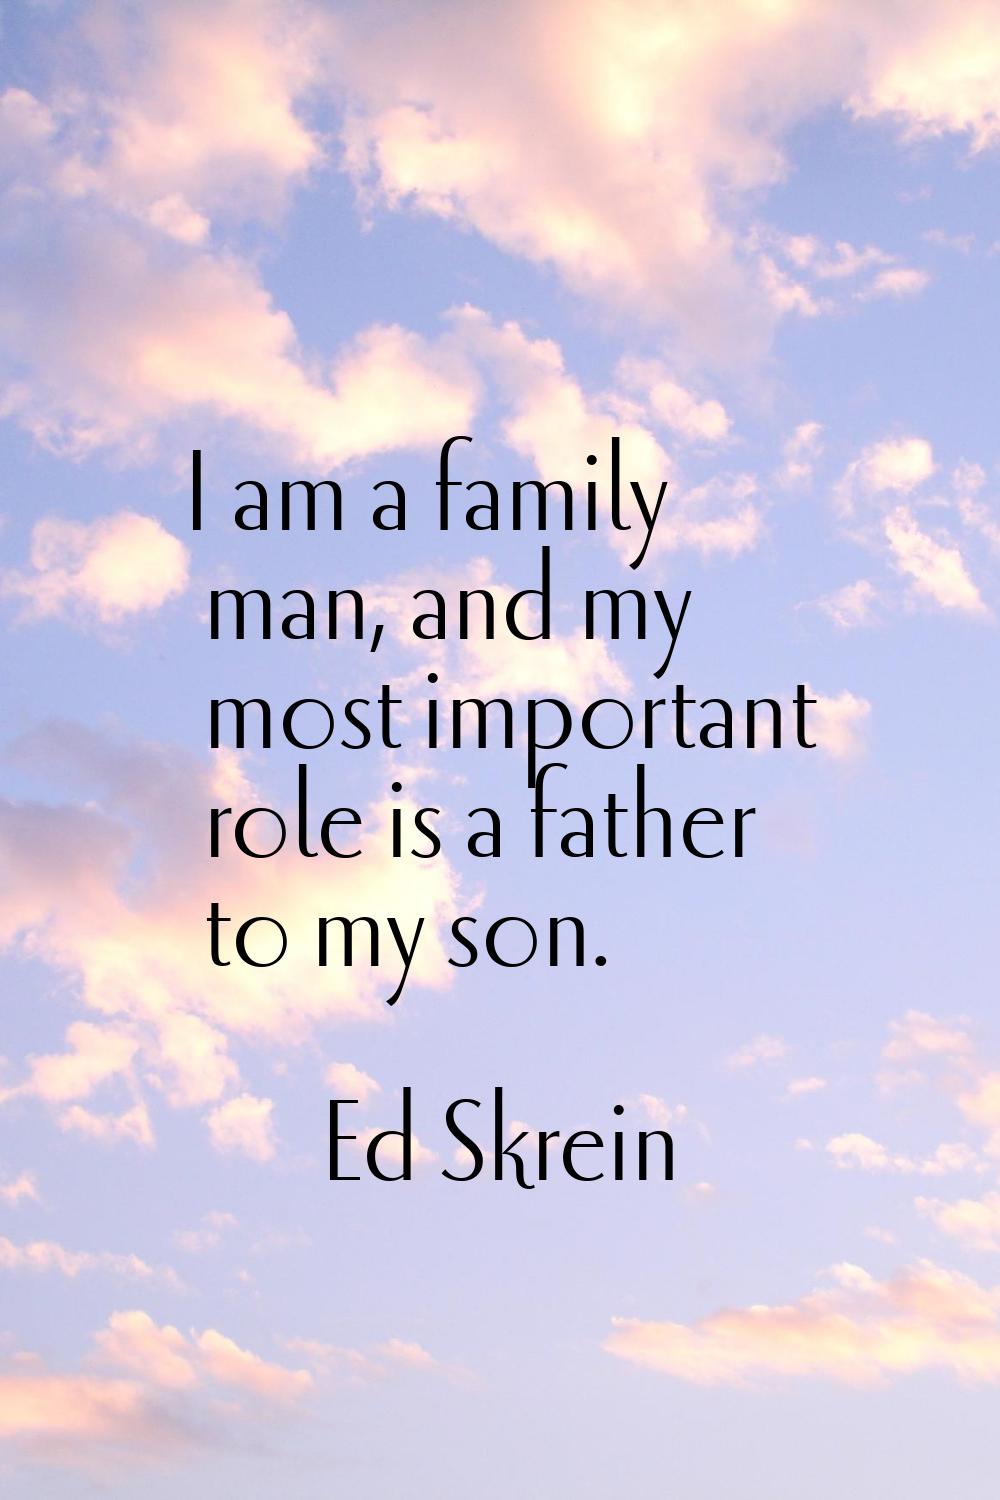 I am a family man, and my most important role is a father to my son.